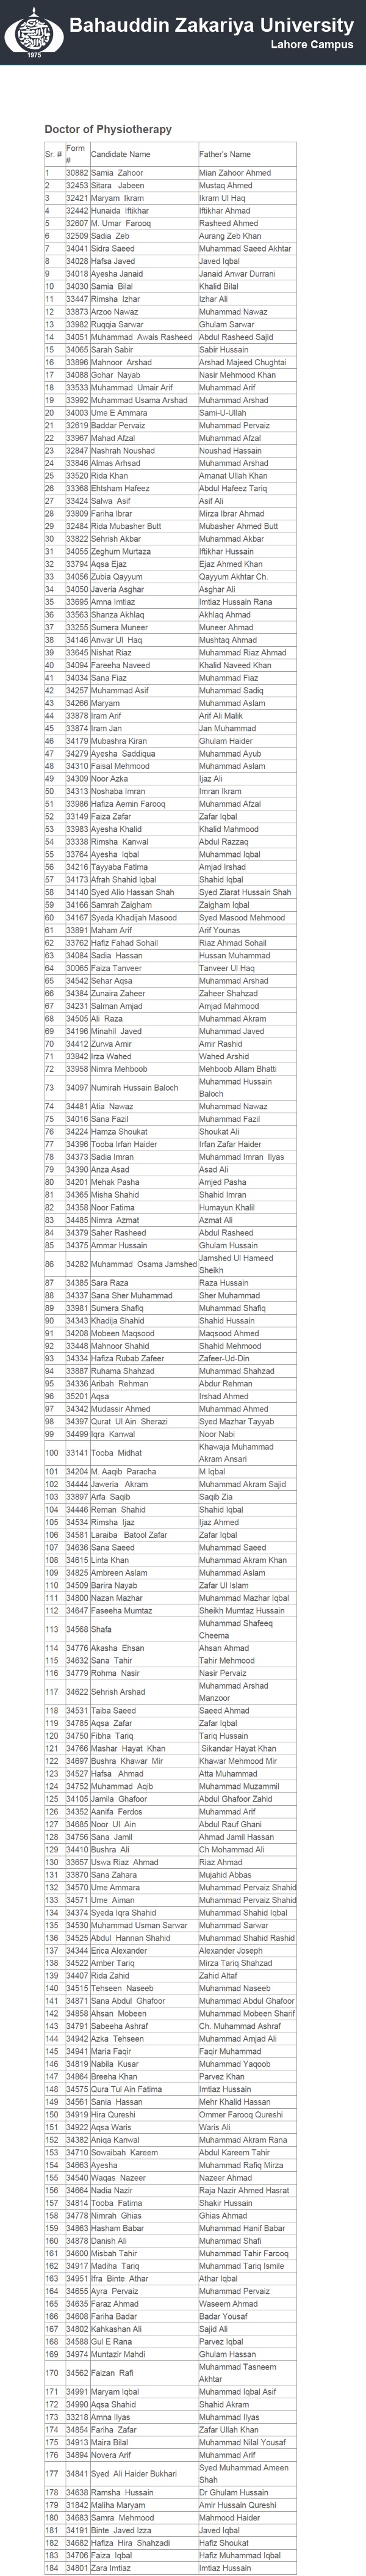 Bahauddin Zakariya University (BZU) Lahore Campus 3rd Merit List for Doctor of Physical Therapy (DPT) For The Year 2014-2015